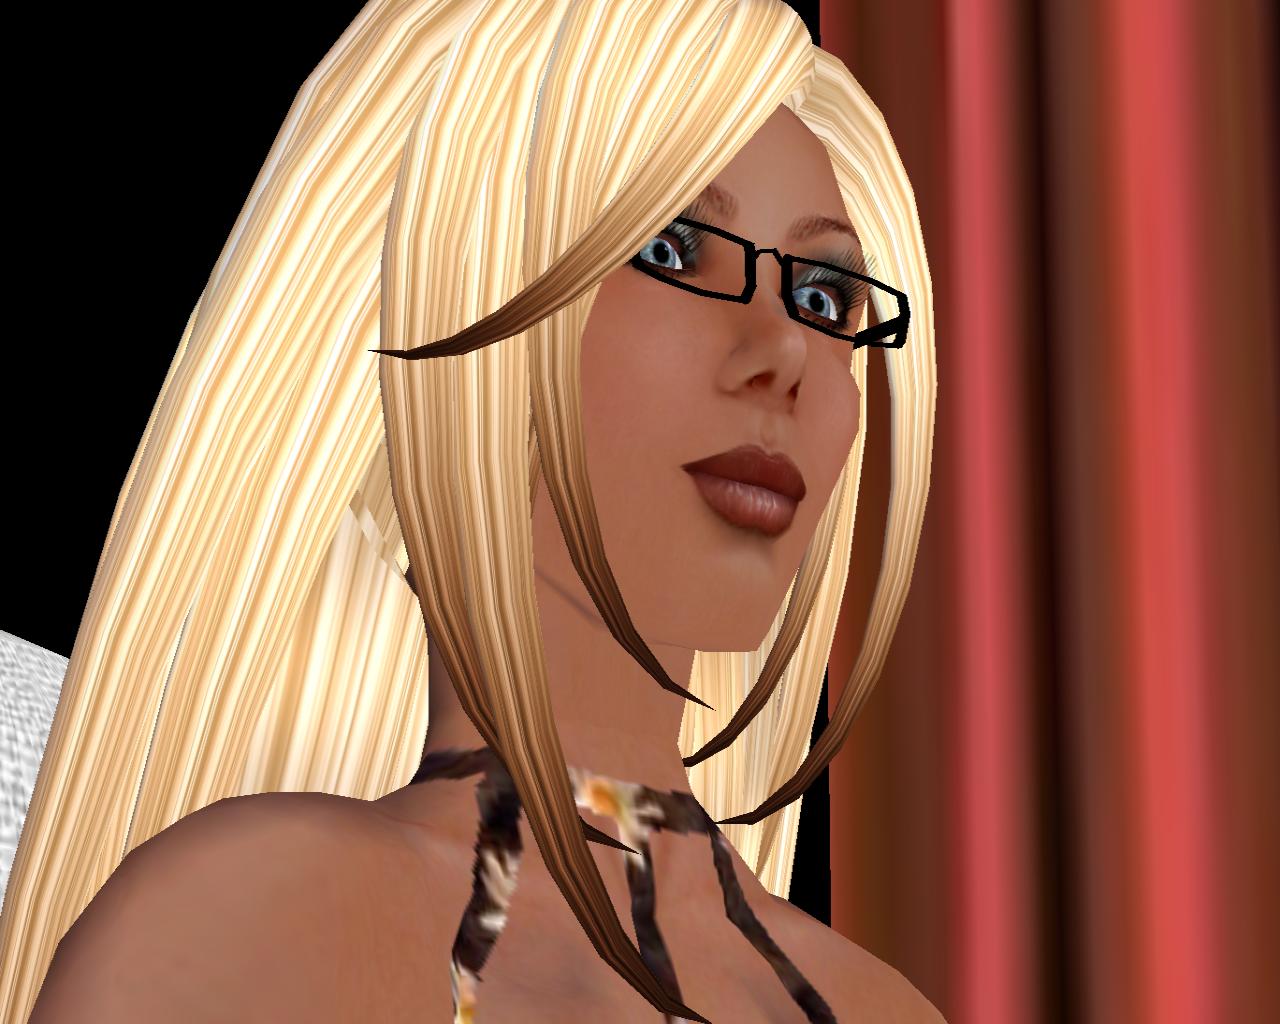 woman wearing glasses in an animated pose